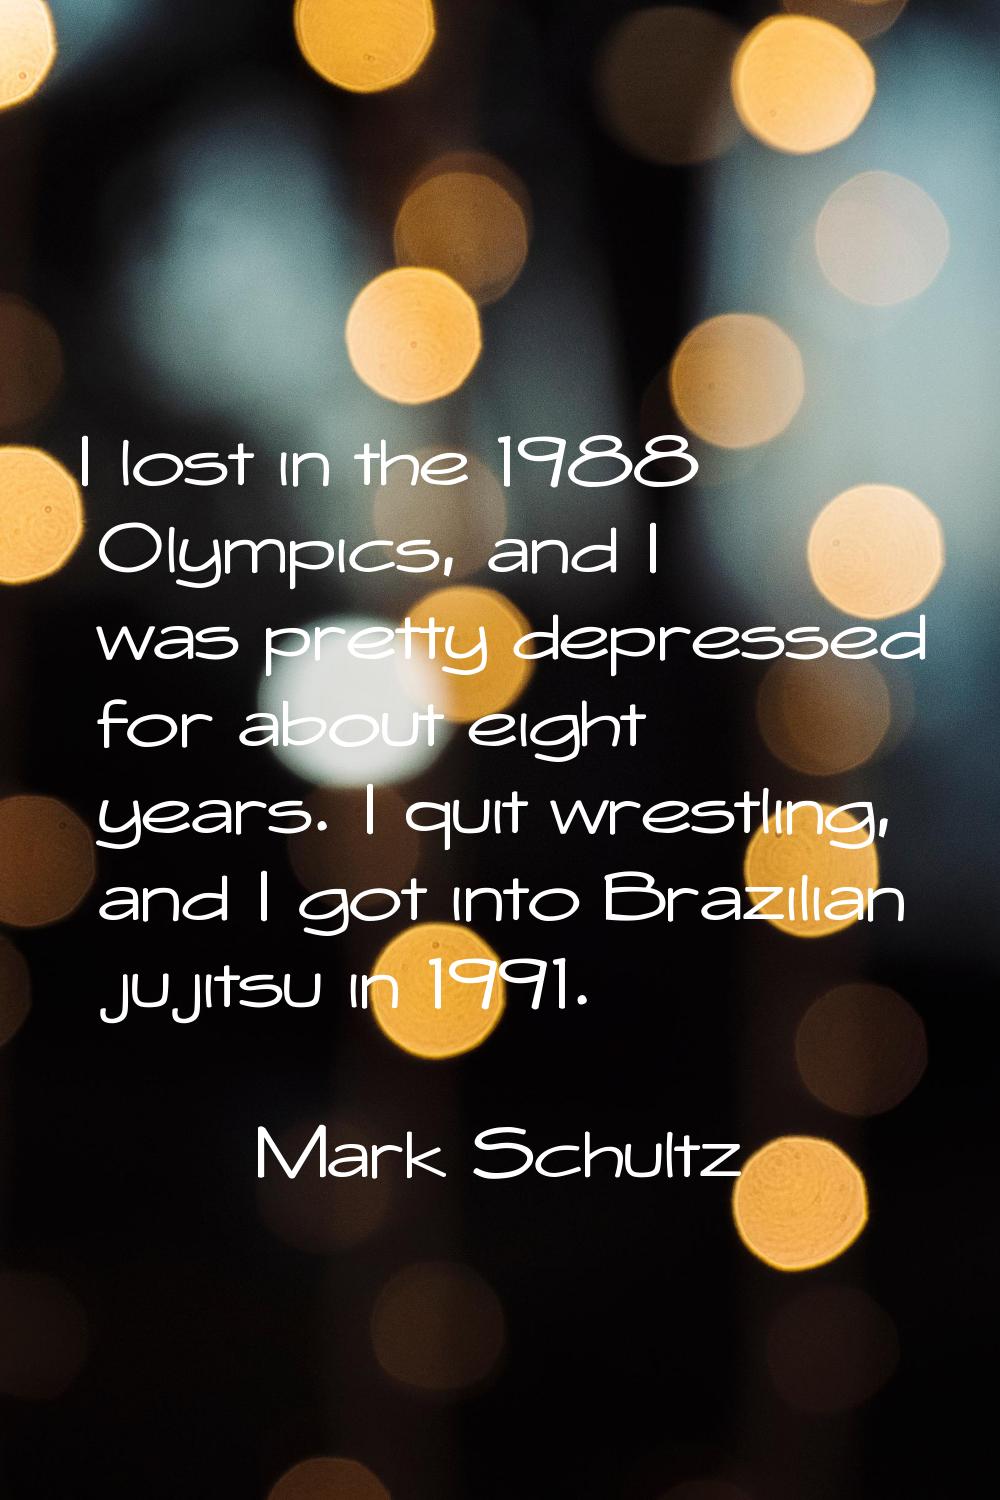 I lost in the 1988 Olympics, and I was pretty depressed for about eight years. I quit wrestling, an